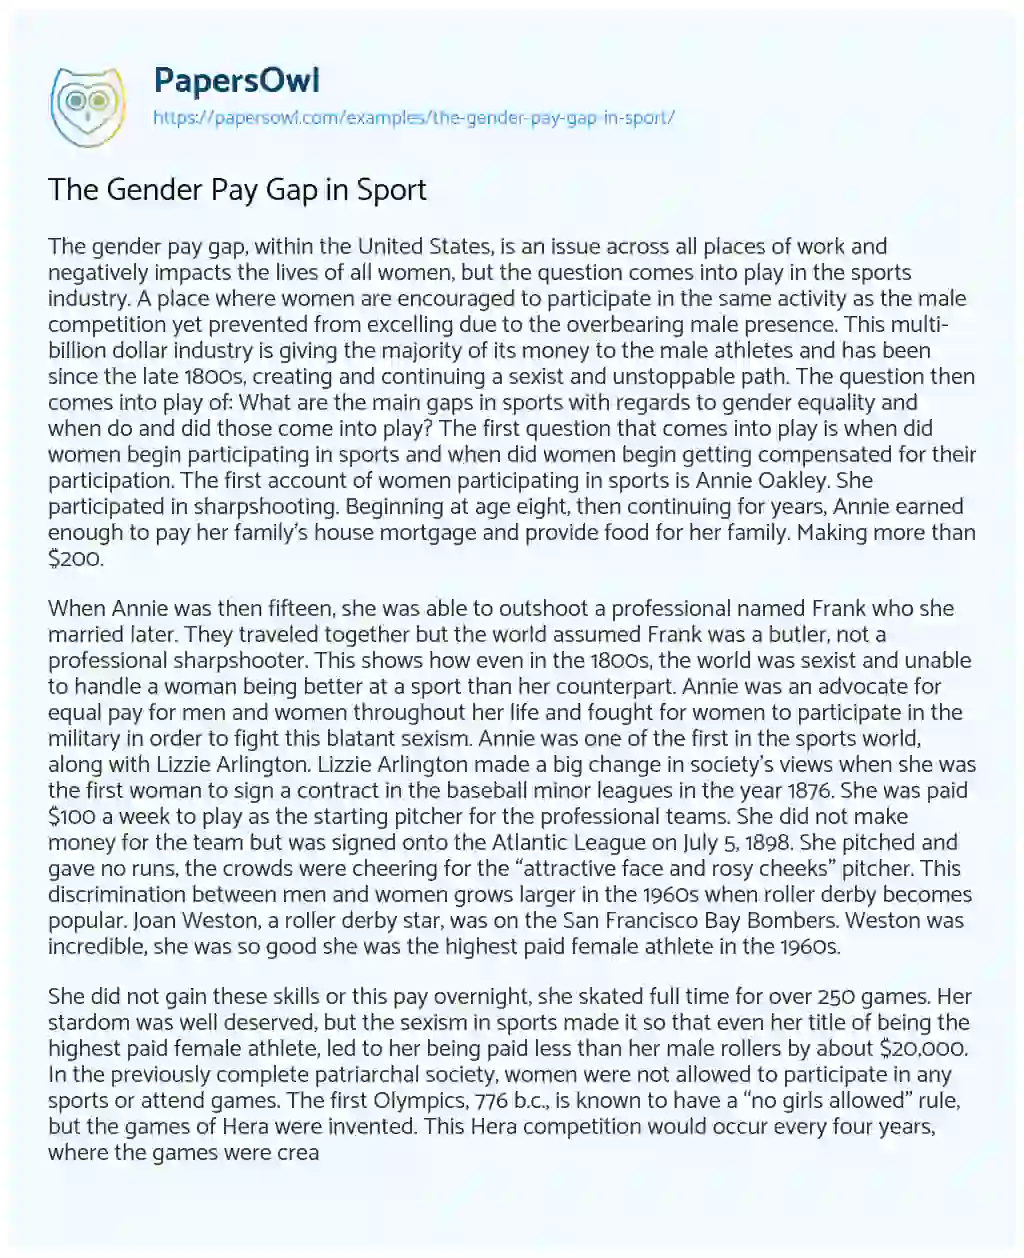 Essay on The Gender Pay Gap in Sport